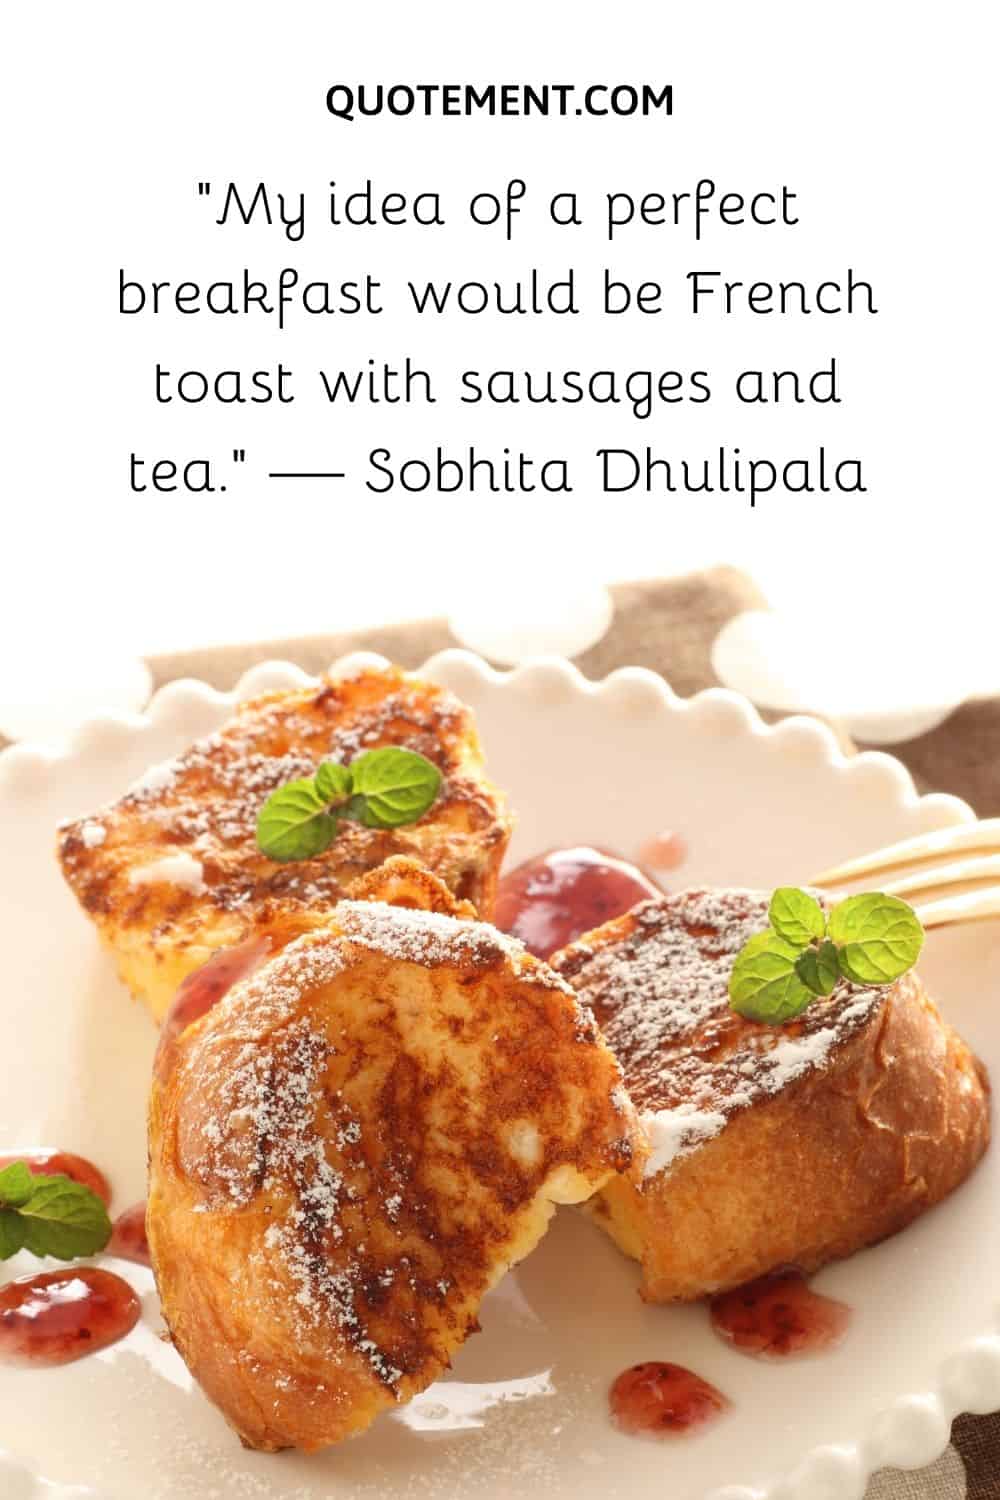 My idea of a perfect breakfast would be French toast with sausages and tea